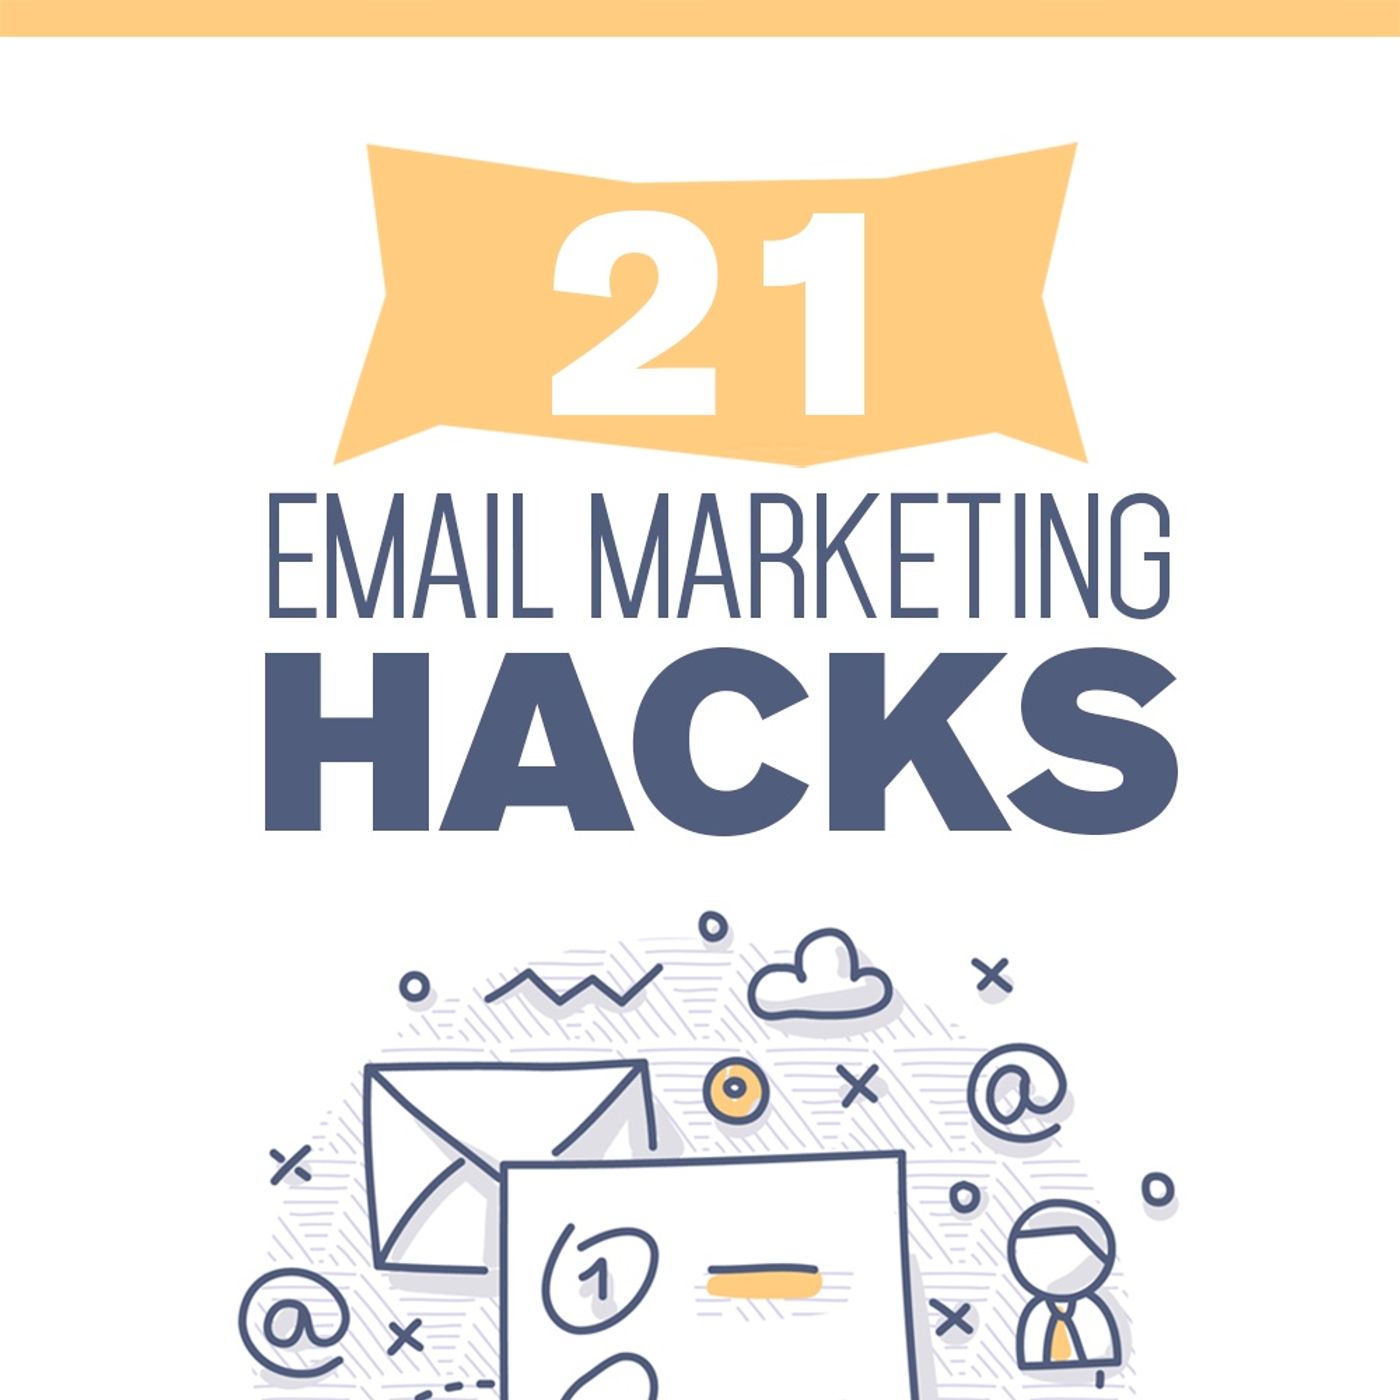 Check out these 21 email marketing tricks